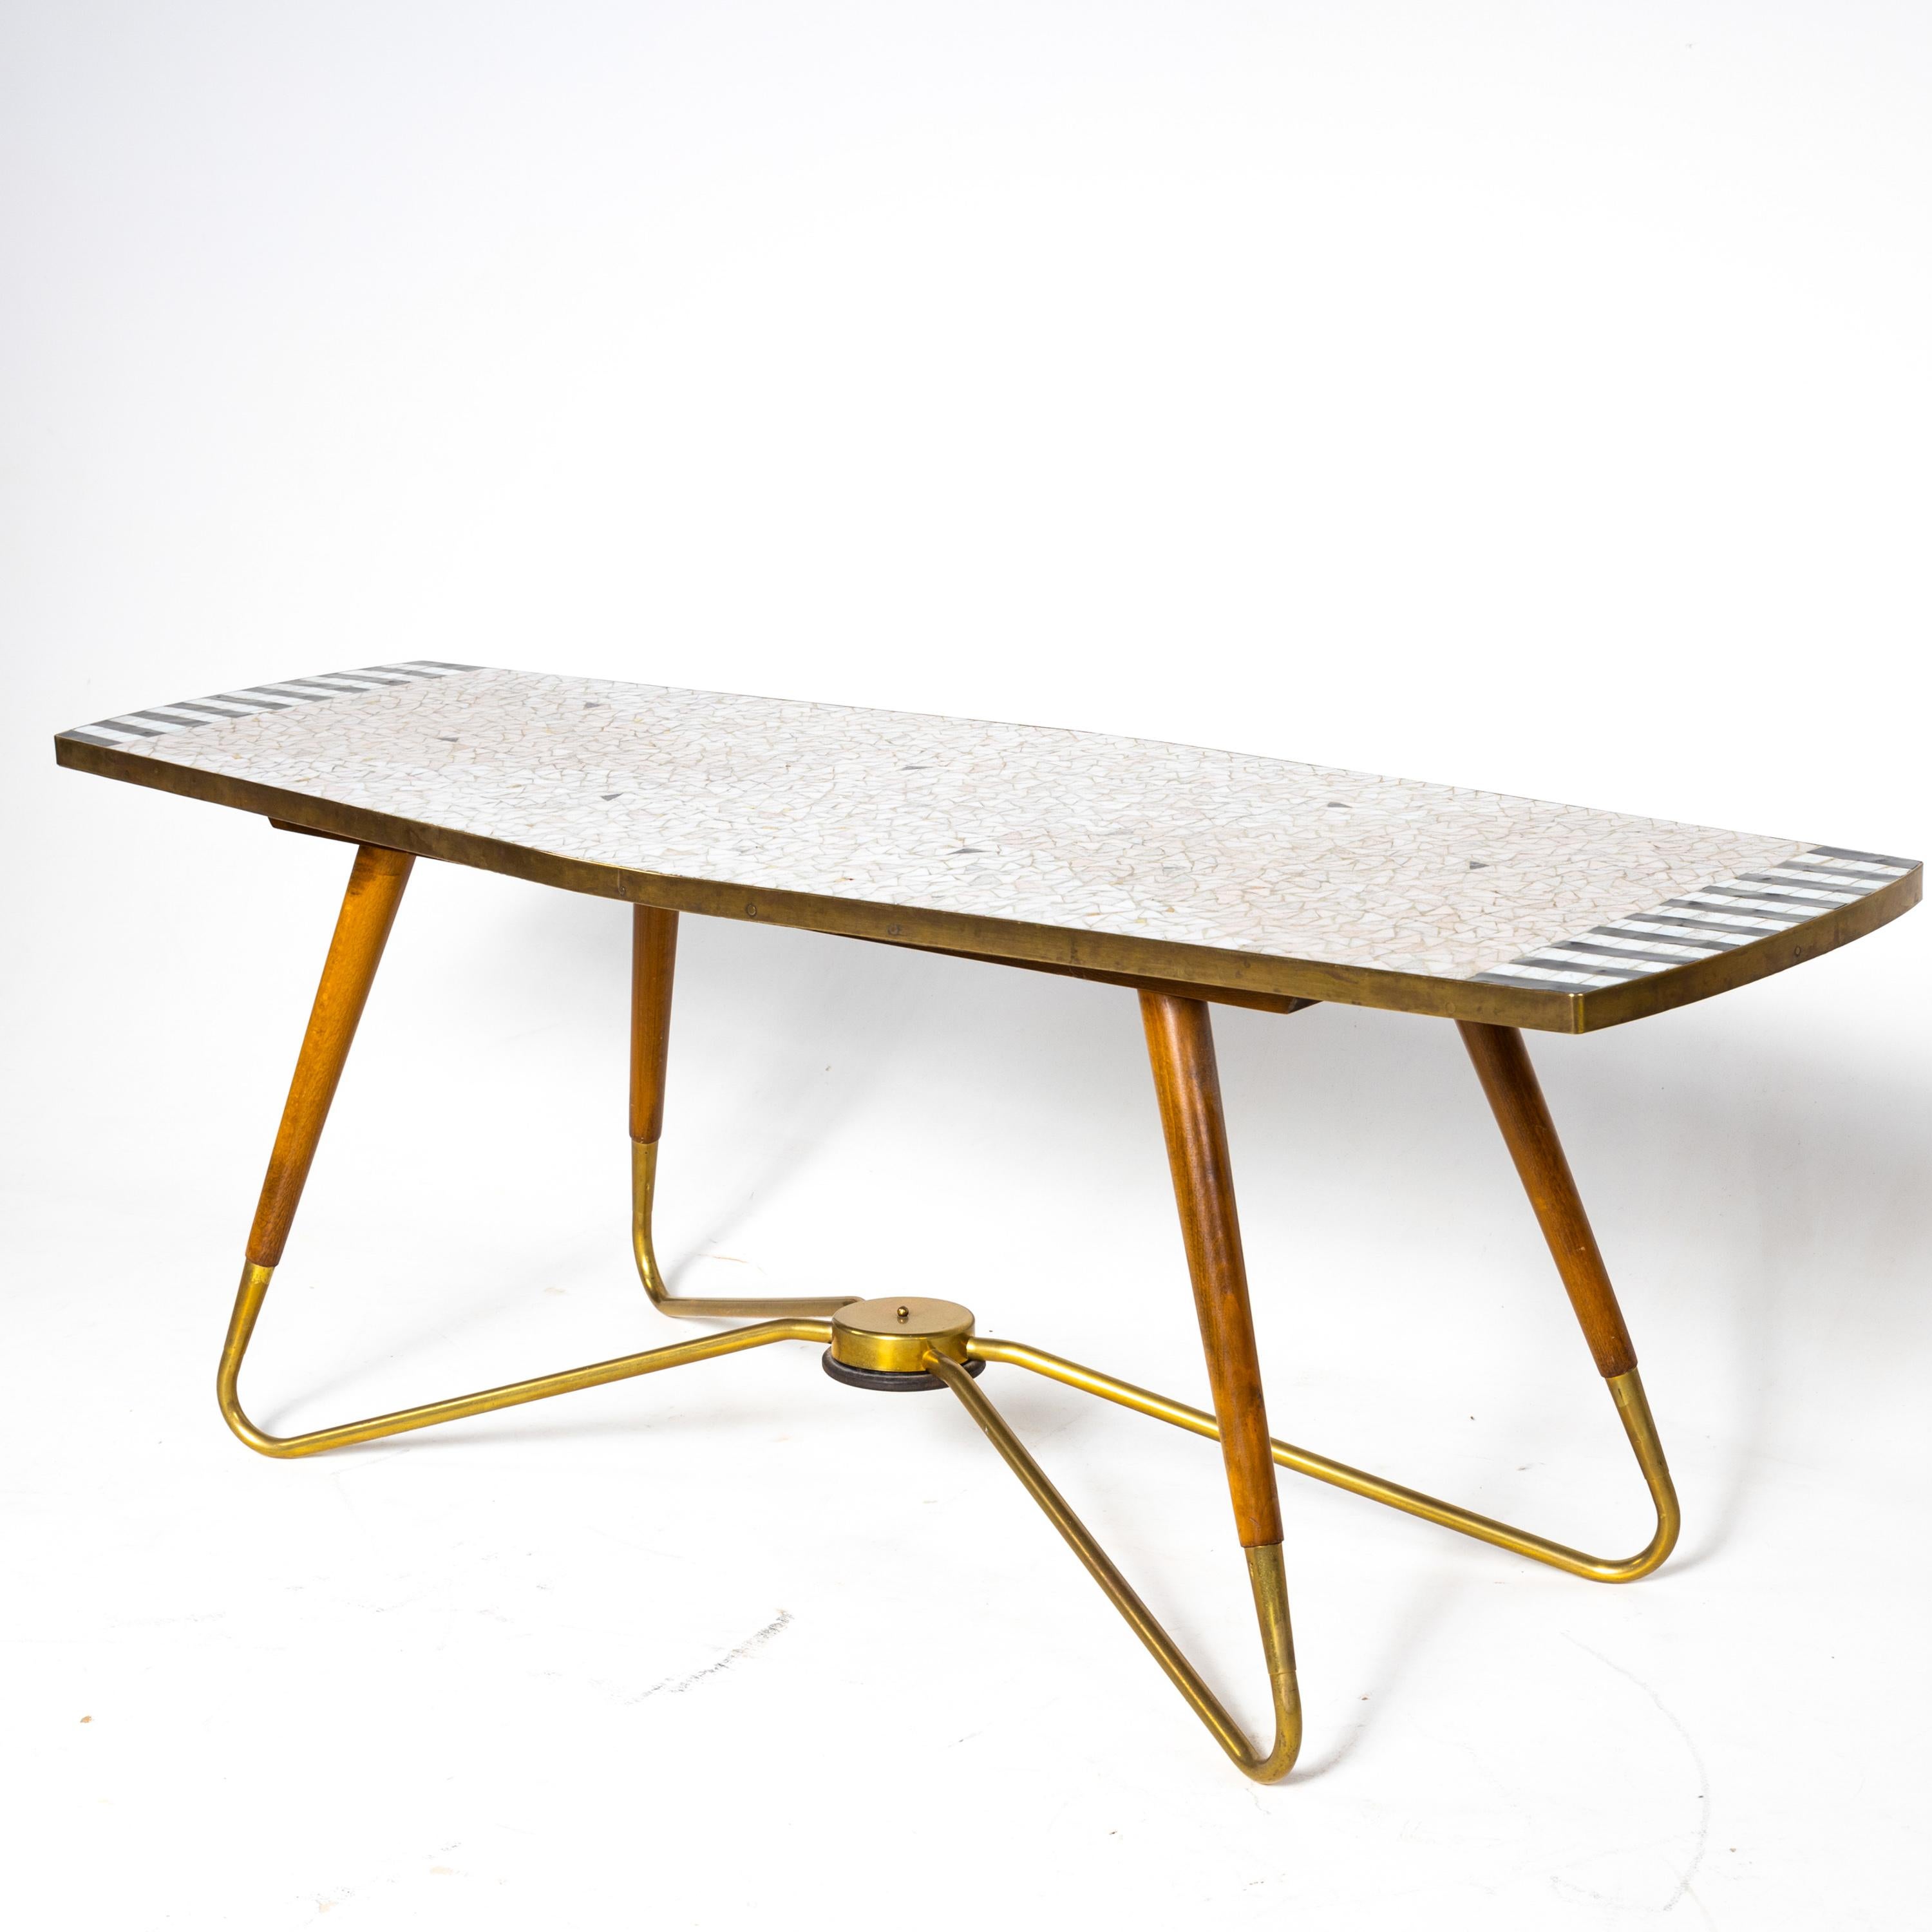 Coffee table with mosaic stone top on a curved frame of brass and wood. Stamped on the underside Ilse möbel, No. 3161.